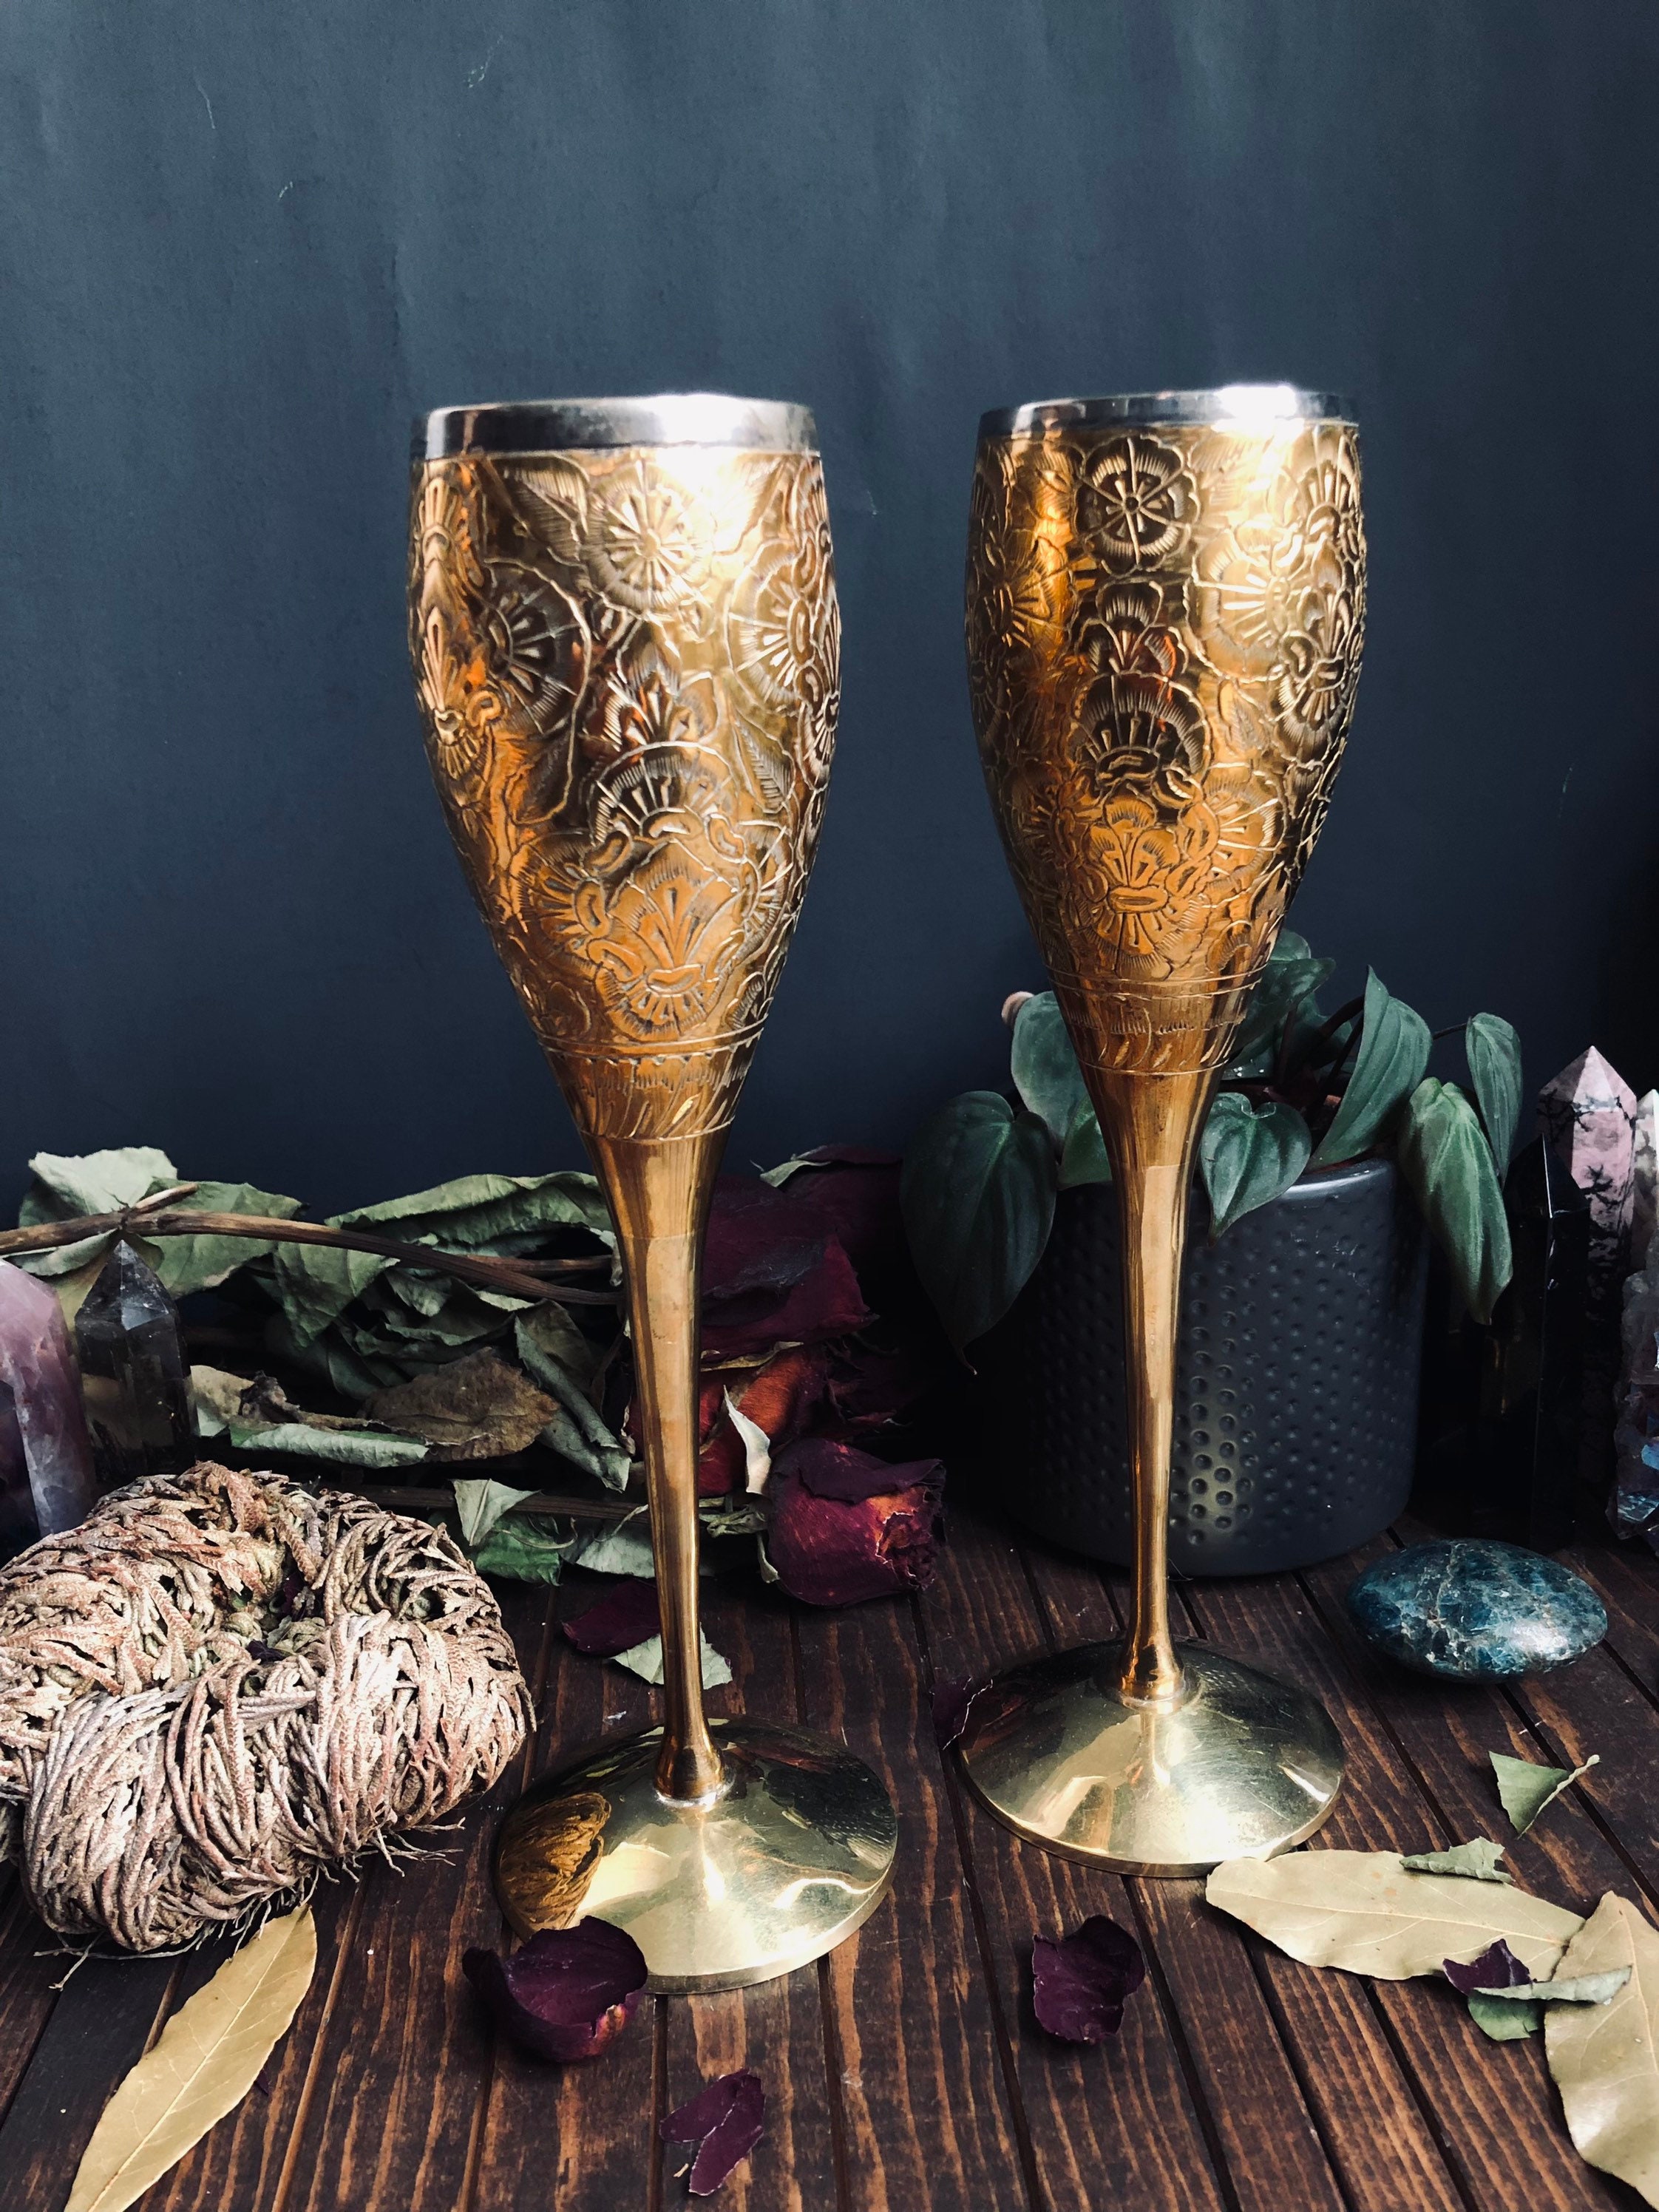 Champagne Flutes, Set of 4 Champagne Glasses Stemmed Toasting Drinkware  with Decorative Brass Metal Hammered Style Base